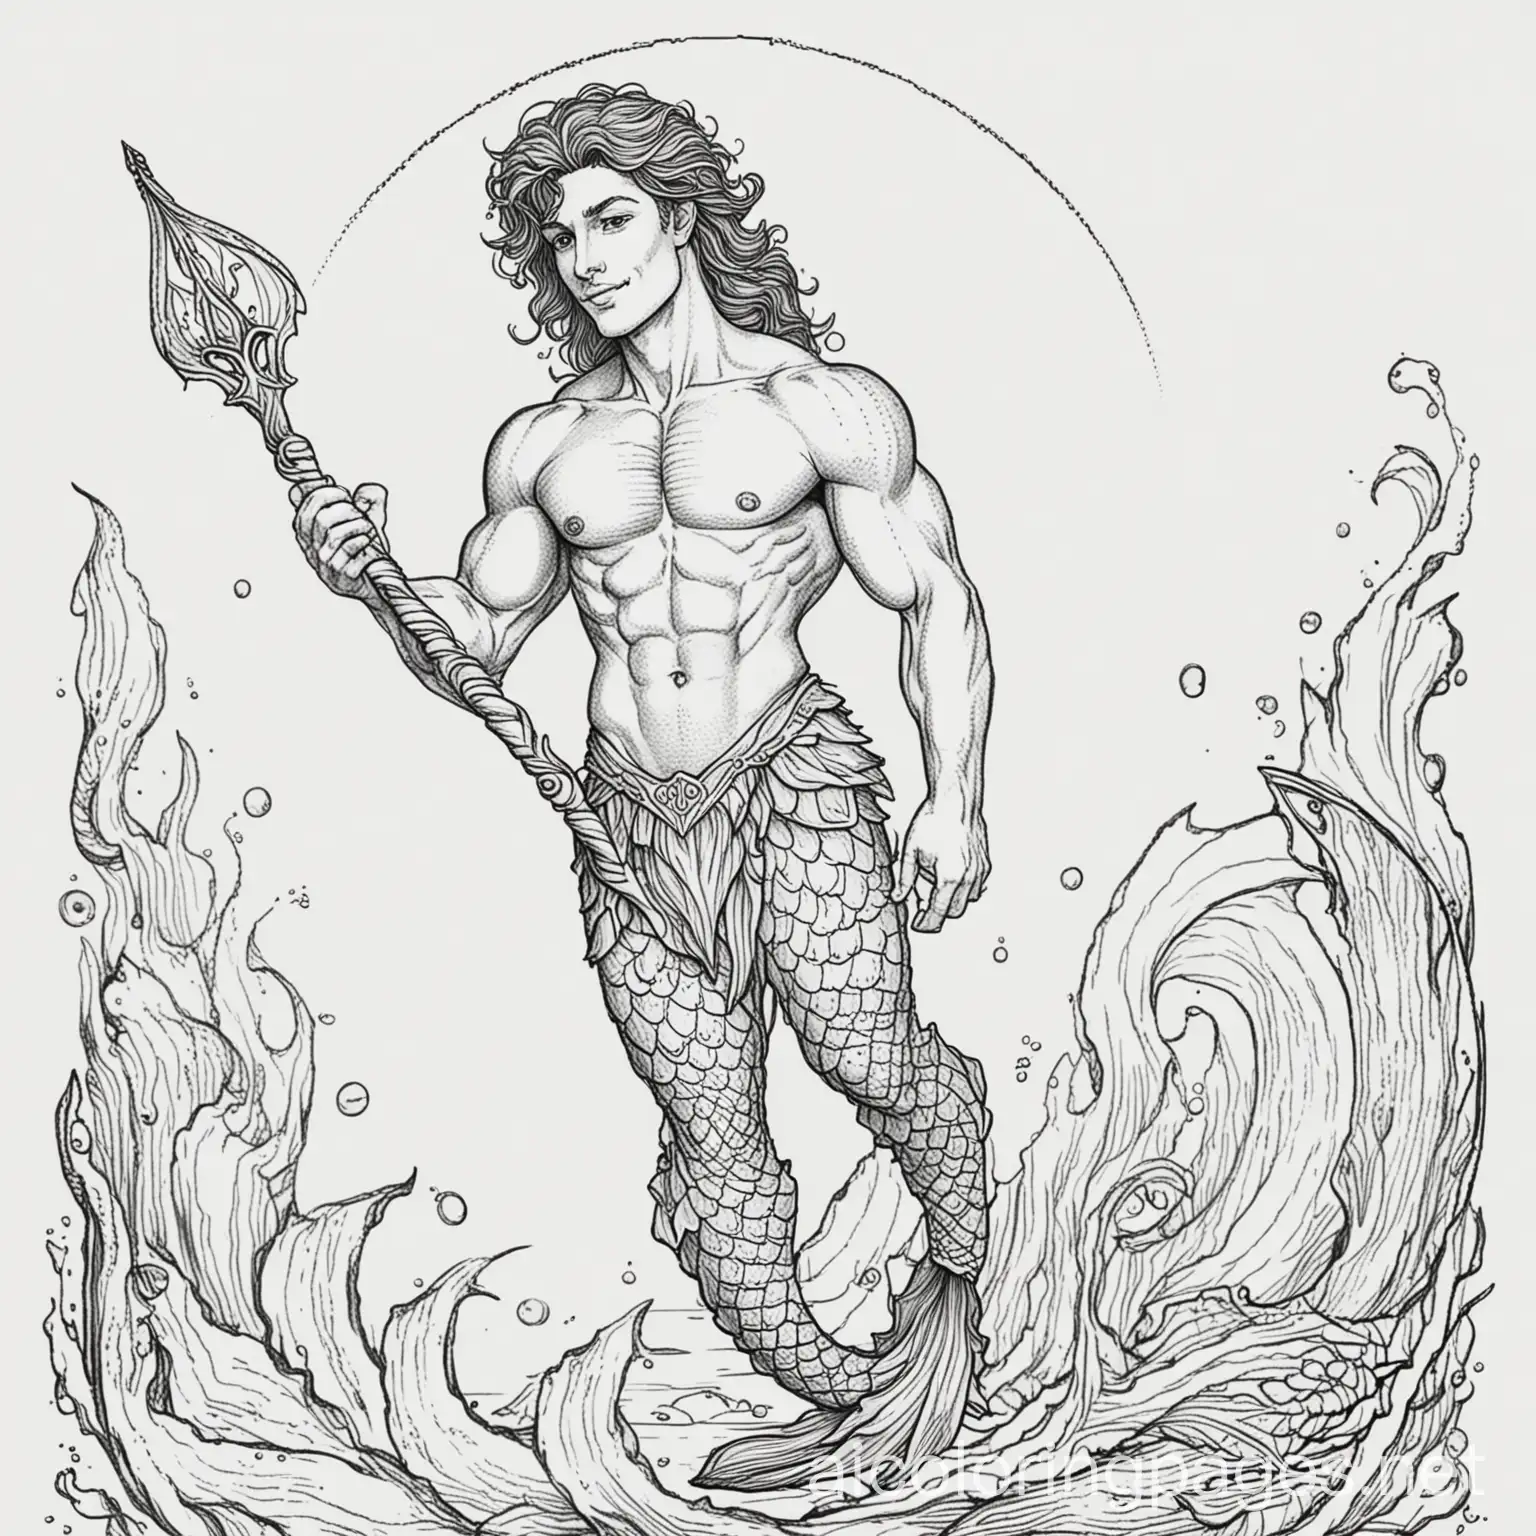 Merman white background , Coloring Page, black and white, line art, white background, Simplicity, Ample White Space. The background of the coloring page is plain white to make it easy for young children to color within the lines. The outlines of all the subjects are easy to distinguish, making it simple for kids to color without too much difficulty